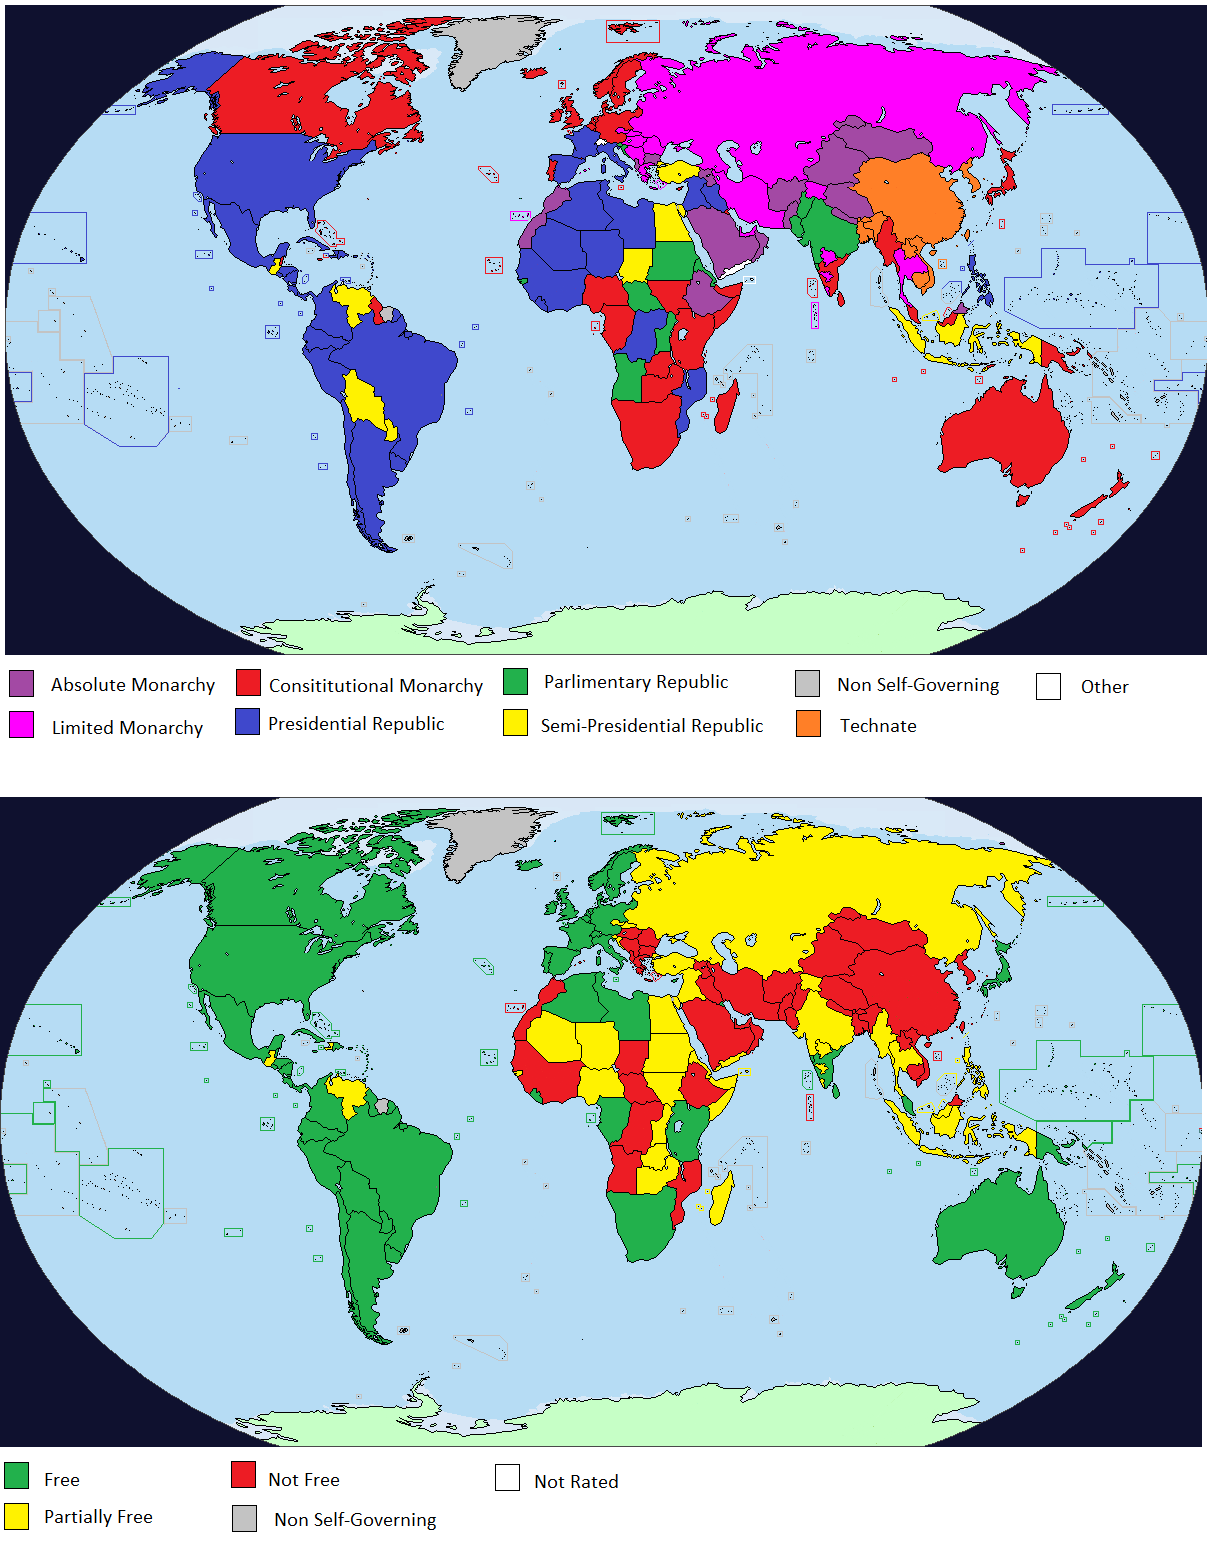 2000 government types and freedom index.png